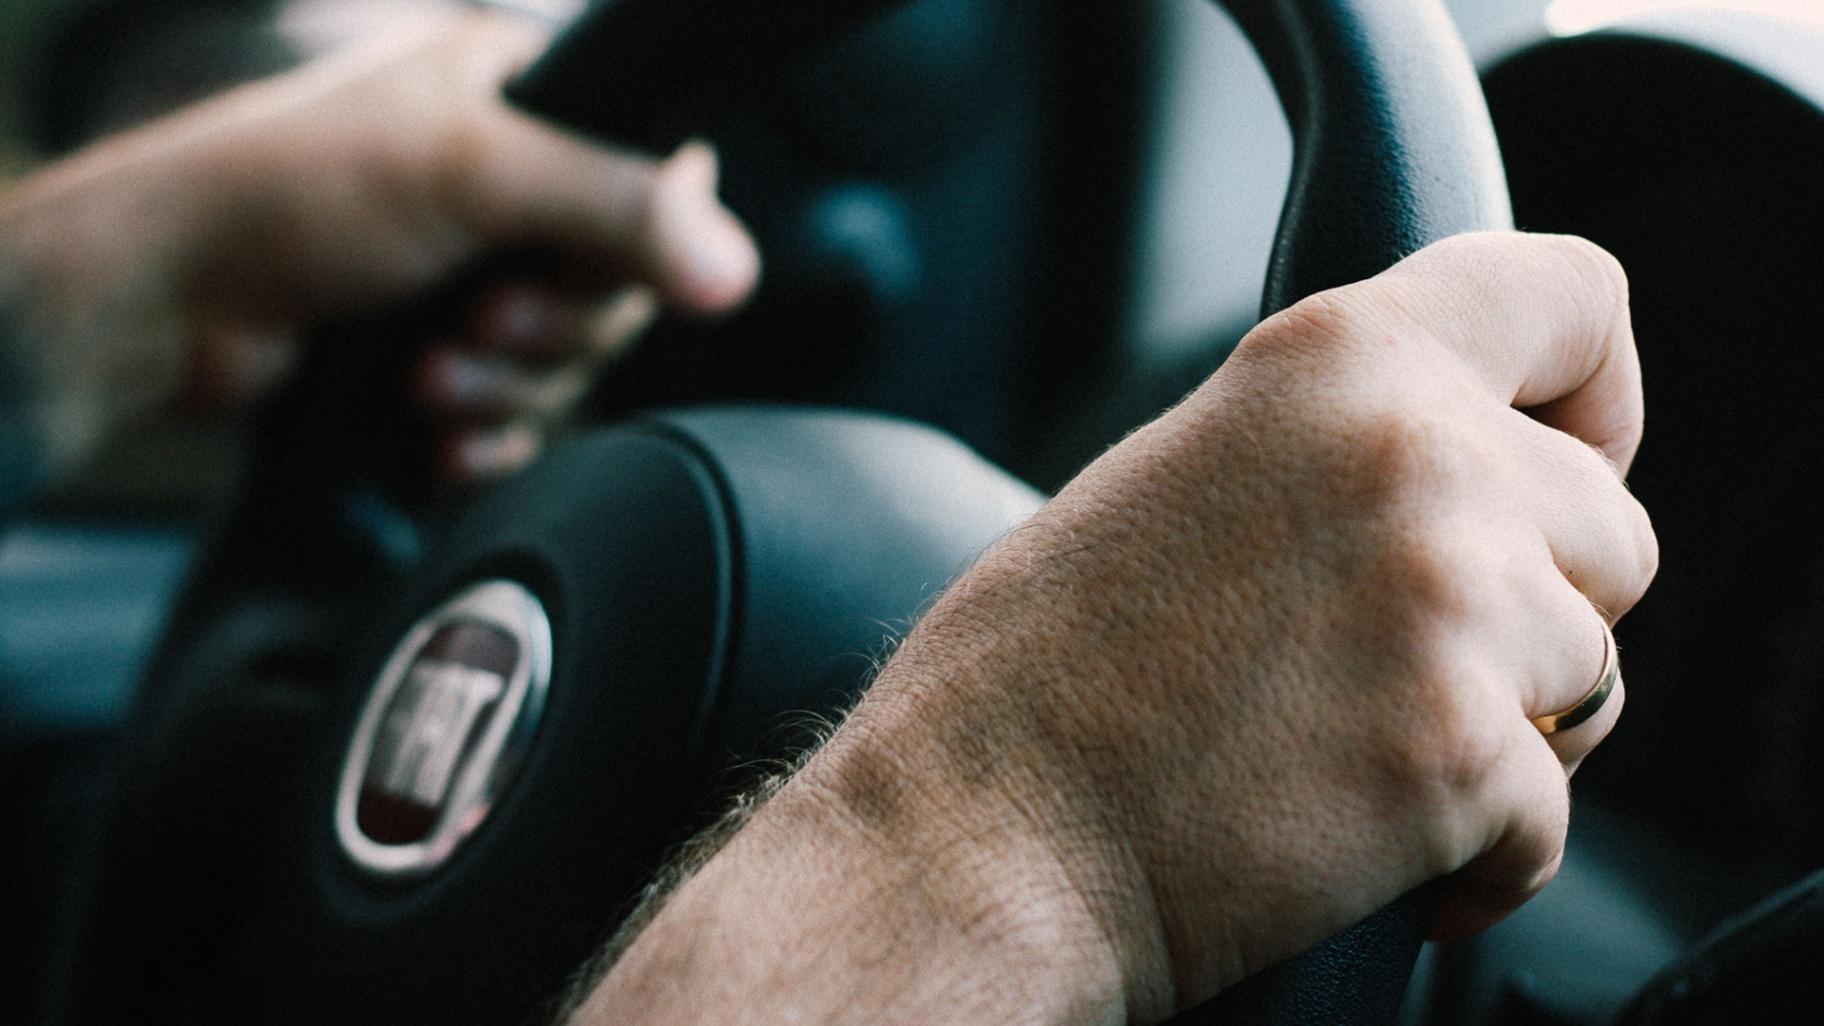 When Should the Elderly Quit Driving? Eye Health and Driving Ability